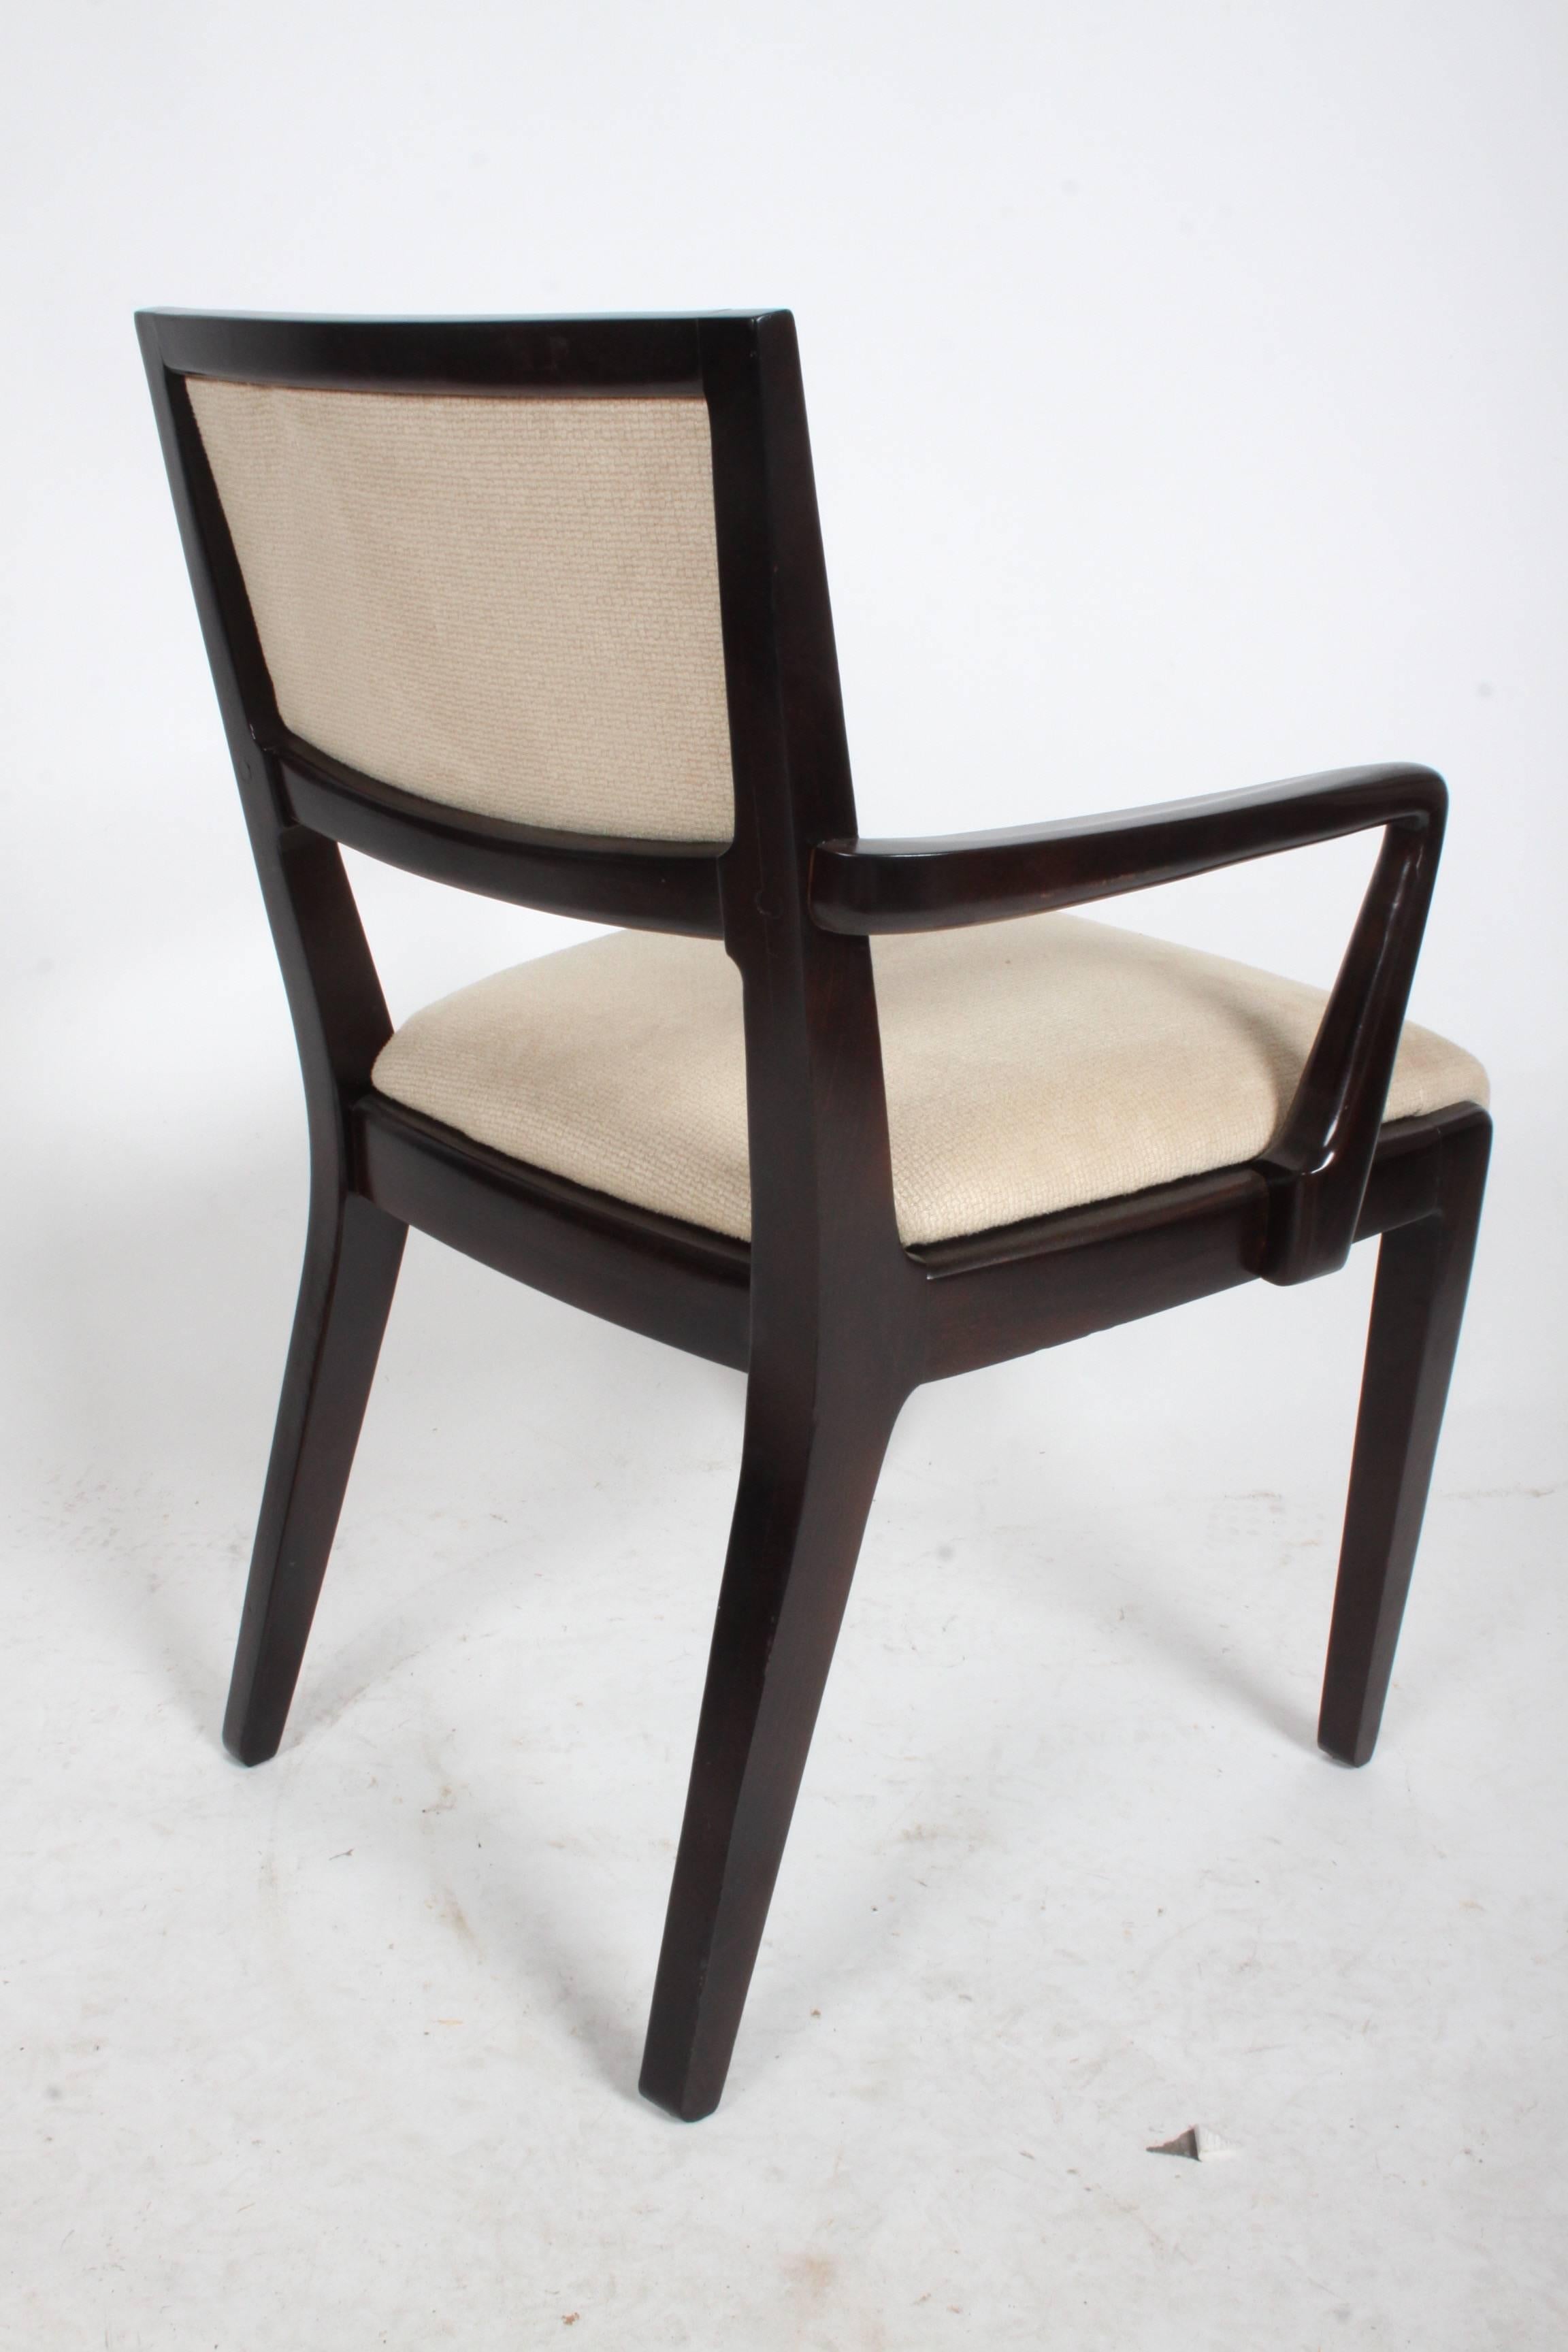 American Pair of Edward Wormley for Drexel Arm Chairs - Precedent Collection  For Sale